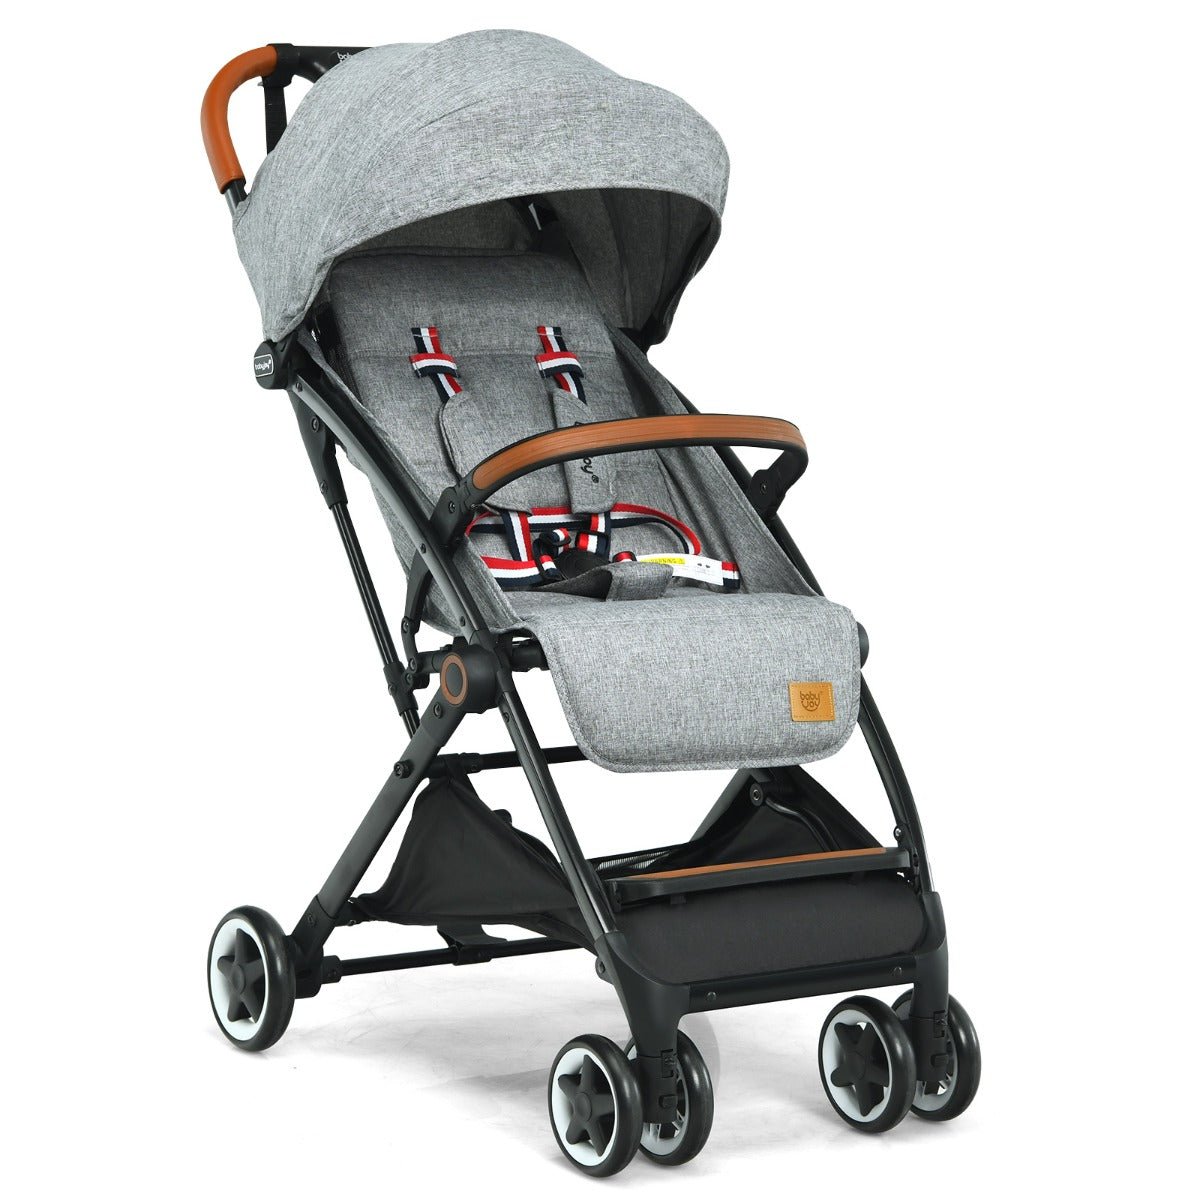 Comfort-First Grey Canopy Stroller for Babies